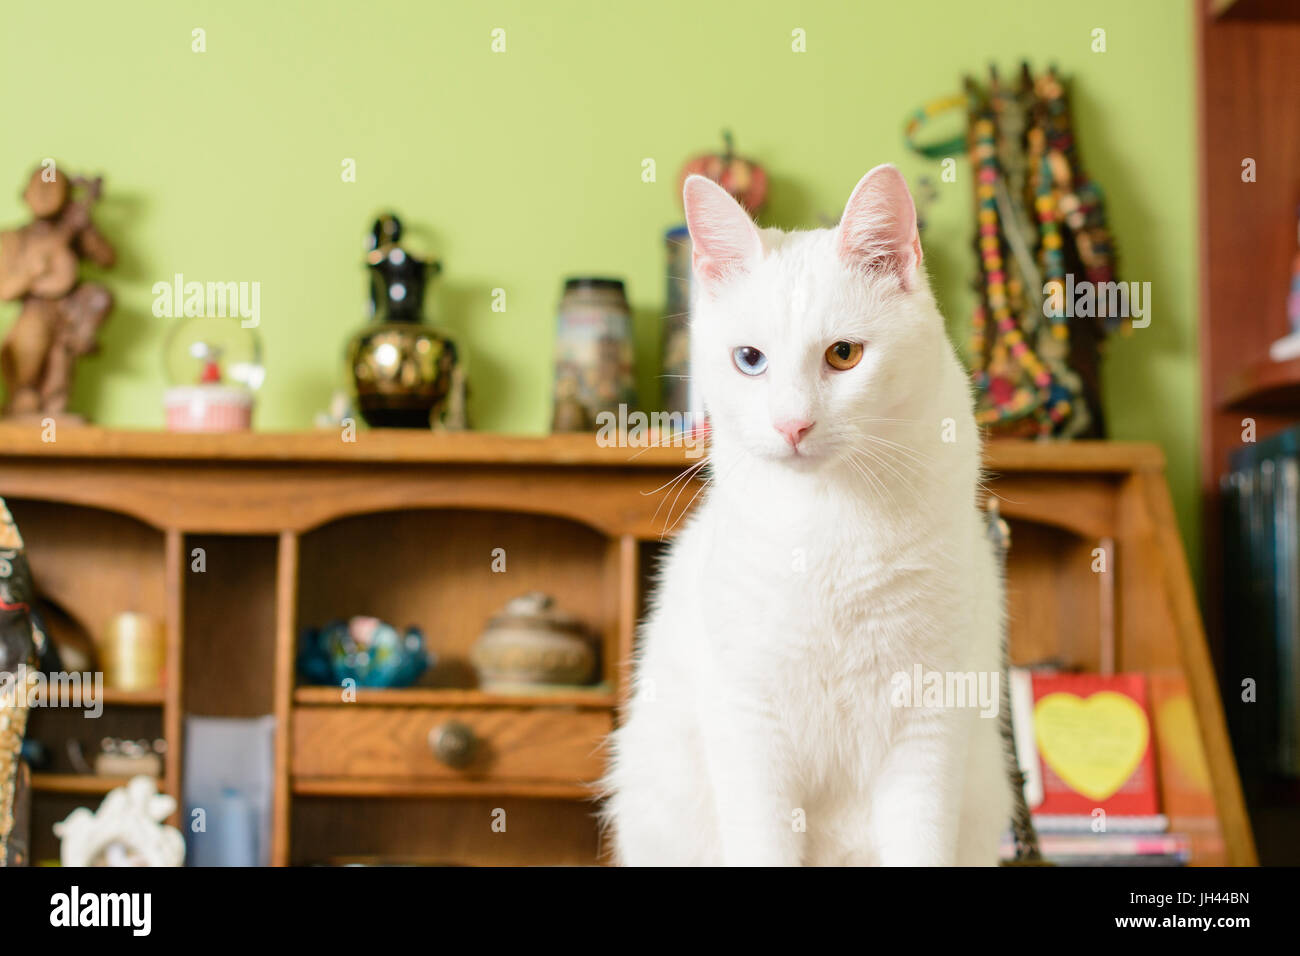 Cat with heterochromia iridum is sitting on the desk, and looking in front of it. Stock Photo